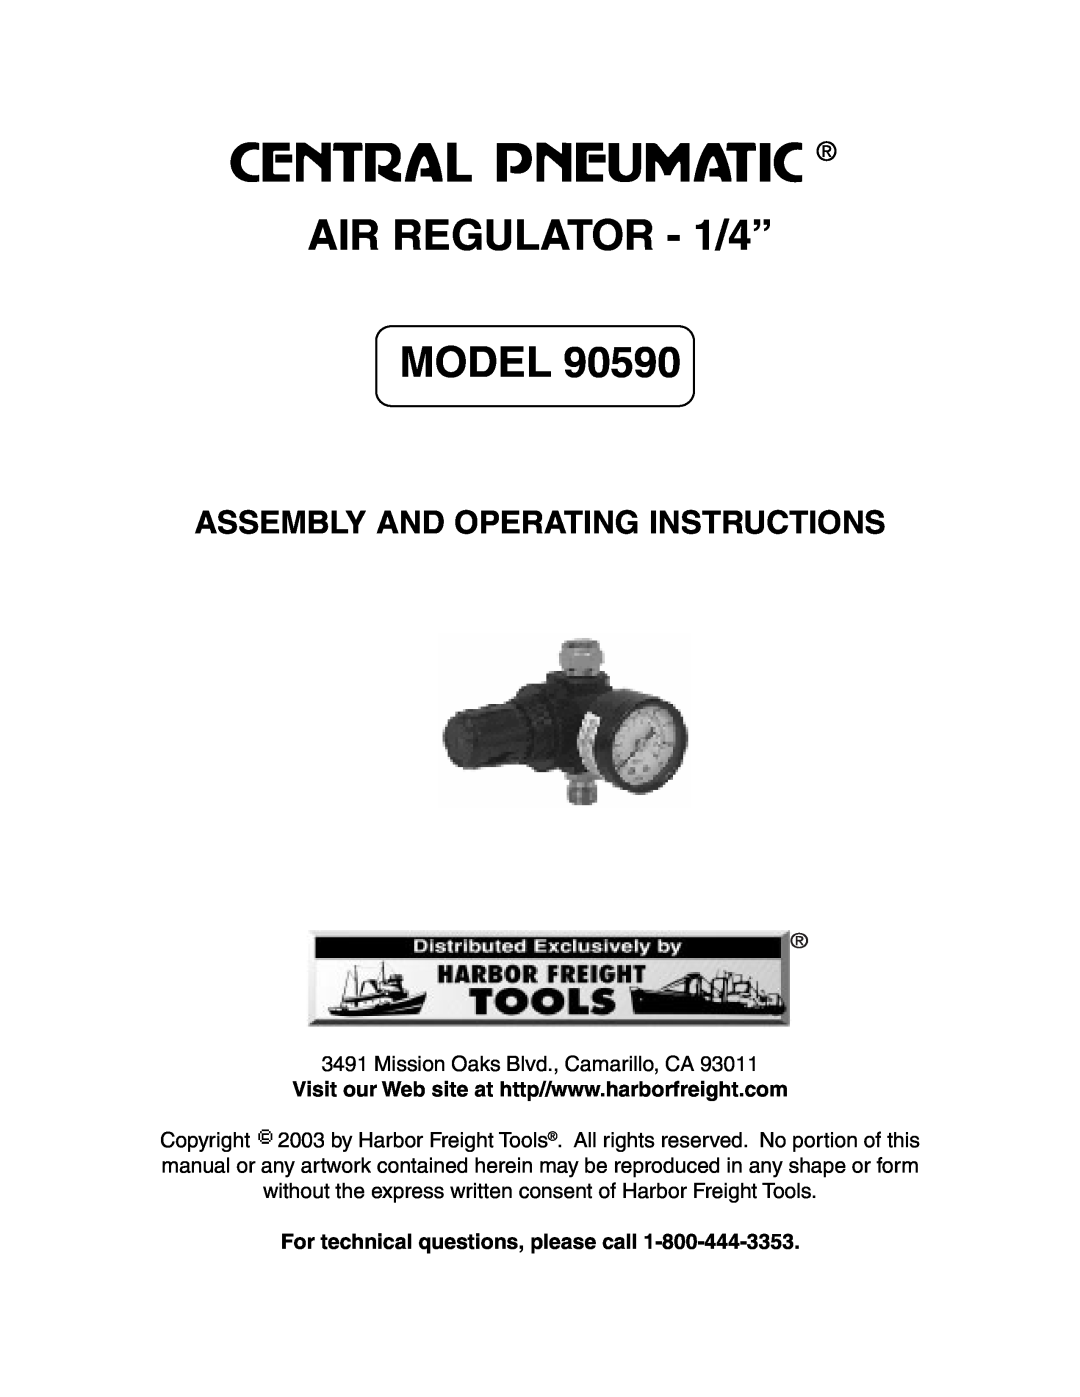 Harbor Freight Tools 90590 manual AIR REGULATOR - 1/4” MODEL, Assembly And Operating Instructions 